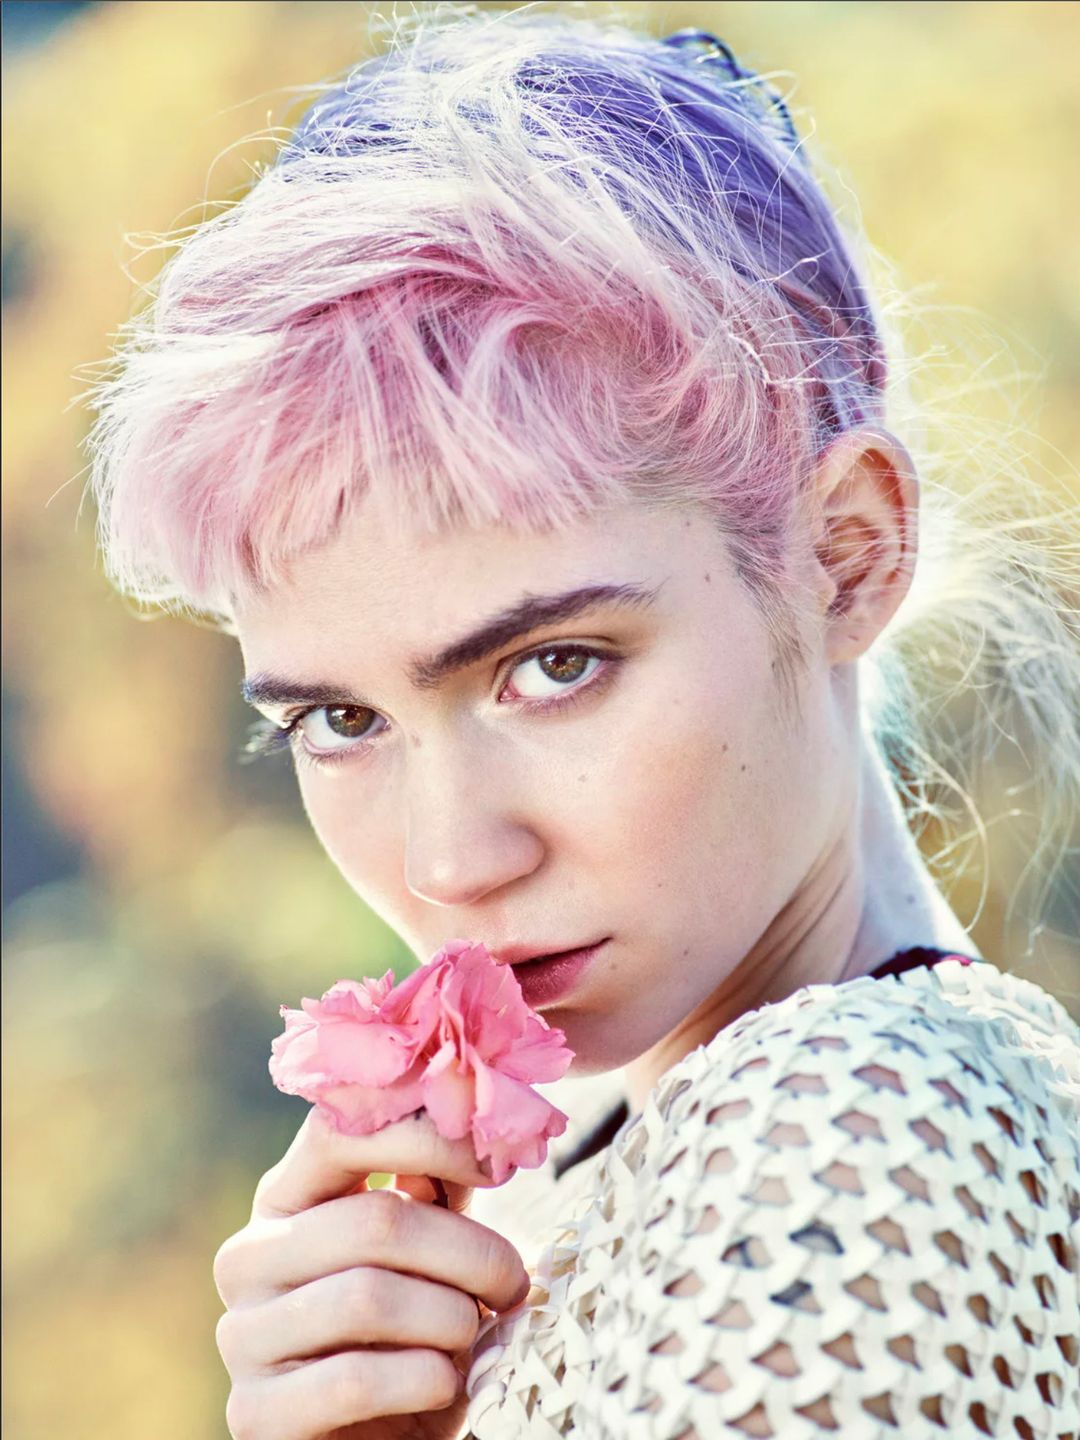 Grimes in real life